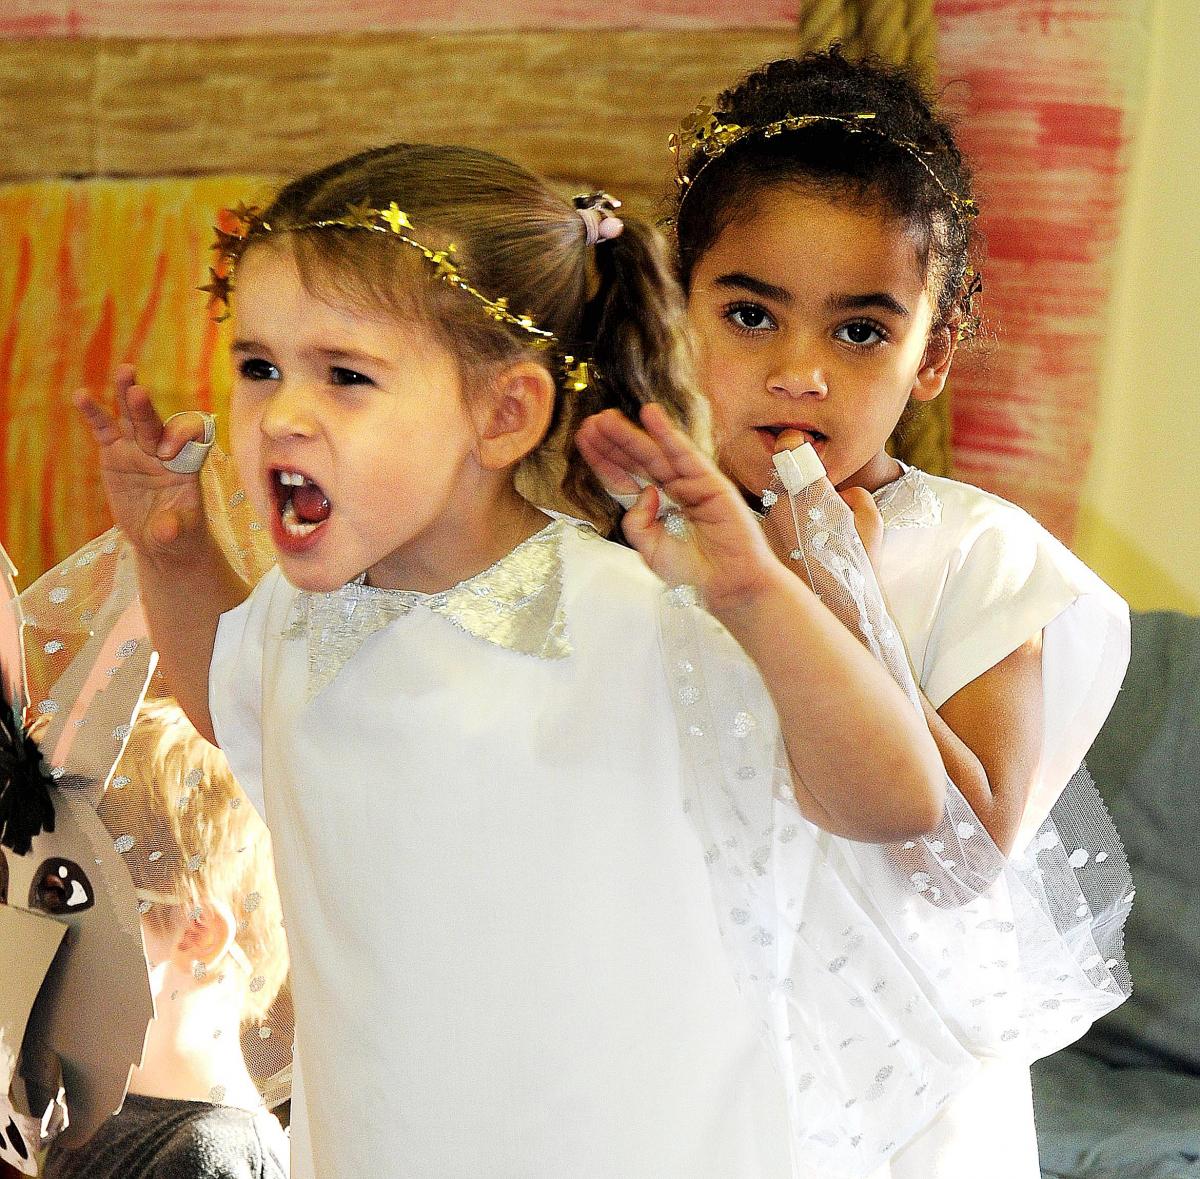 Appearing as Angel Delights in Menston Primary School Nativity 'The Little Owl and the Star' were April Lever, left, and Lily Cook